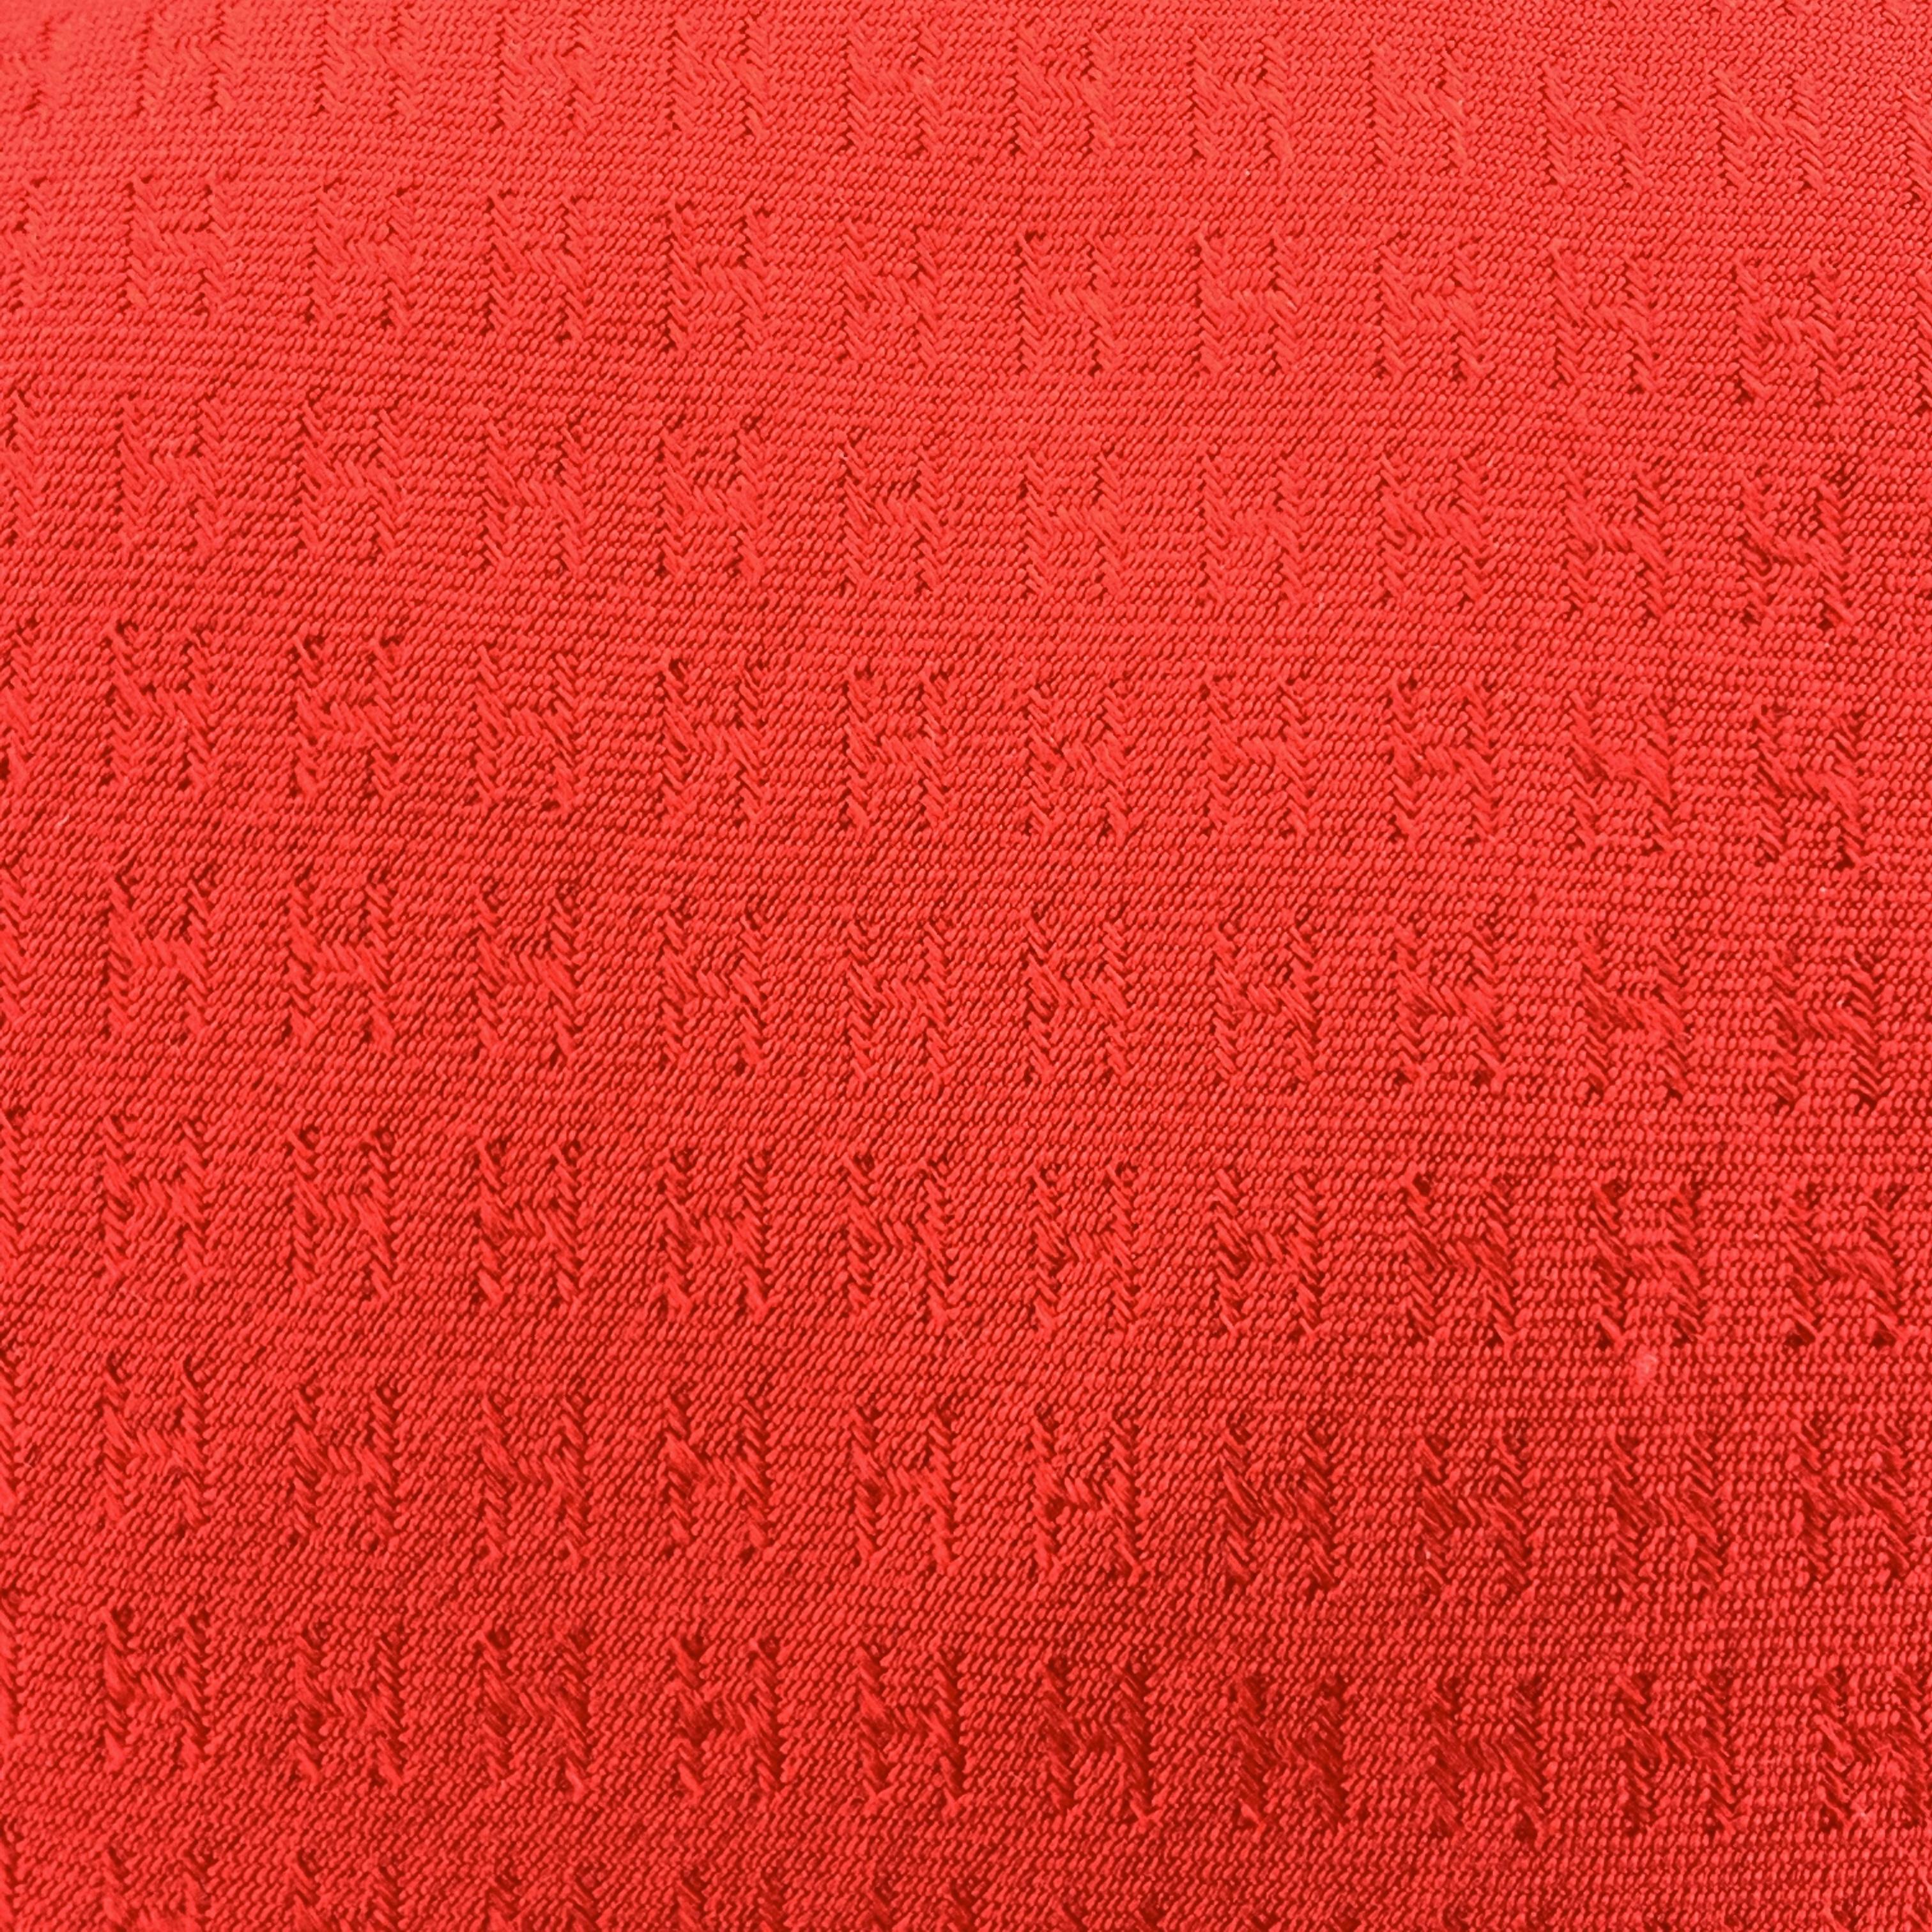 HERMES necktie comes in red silk twill with all over H print. Wear throughout. As-is. Made in France.

Good Pre-Owned Condition.

Width: 3.5 in.  